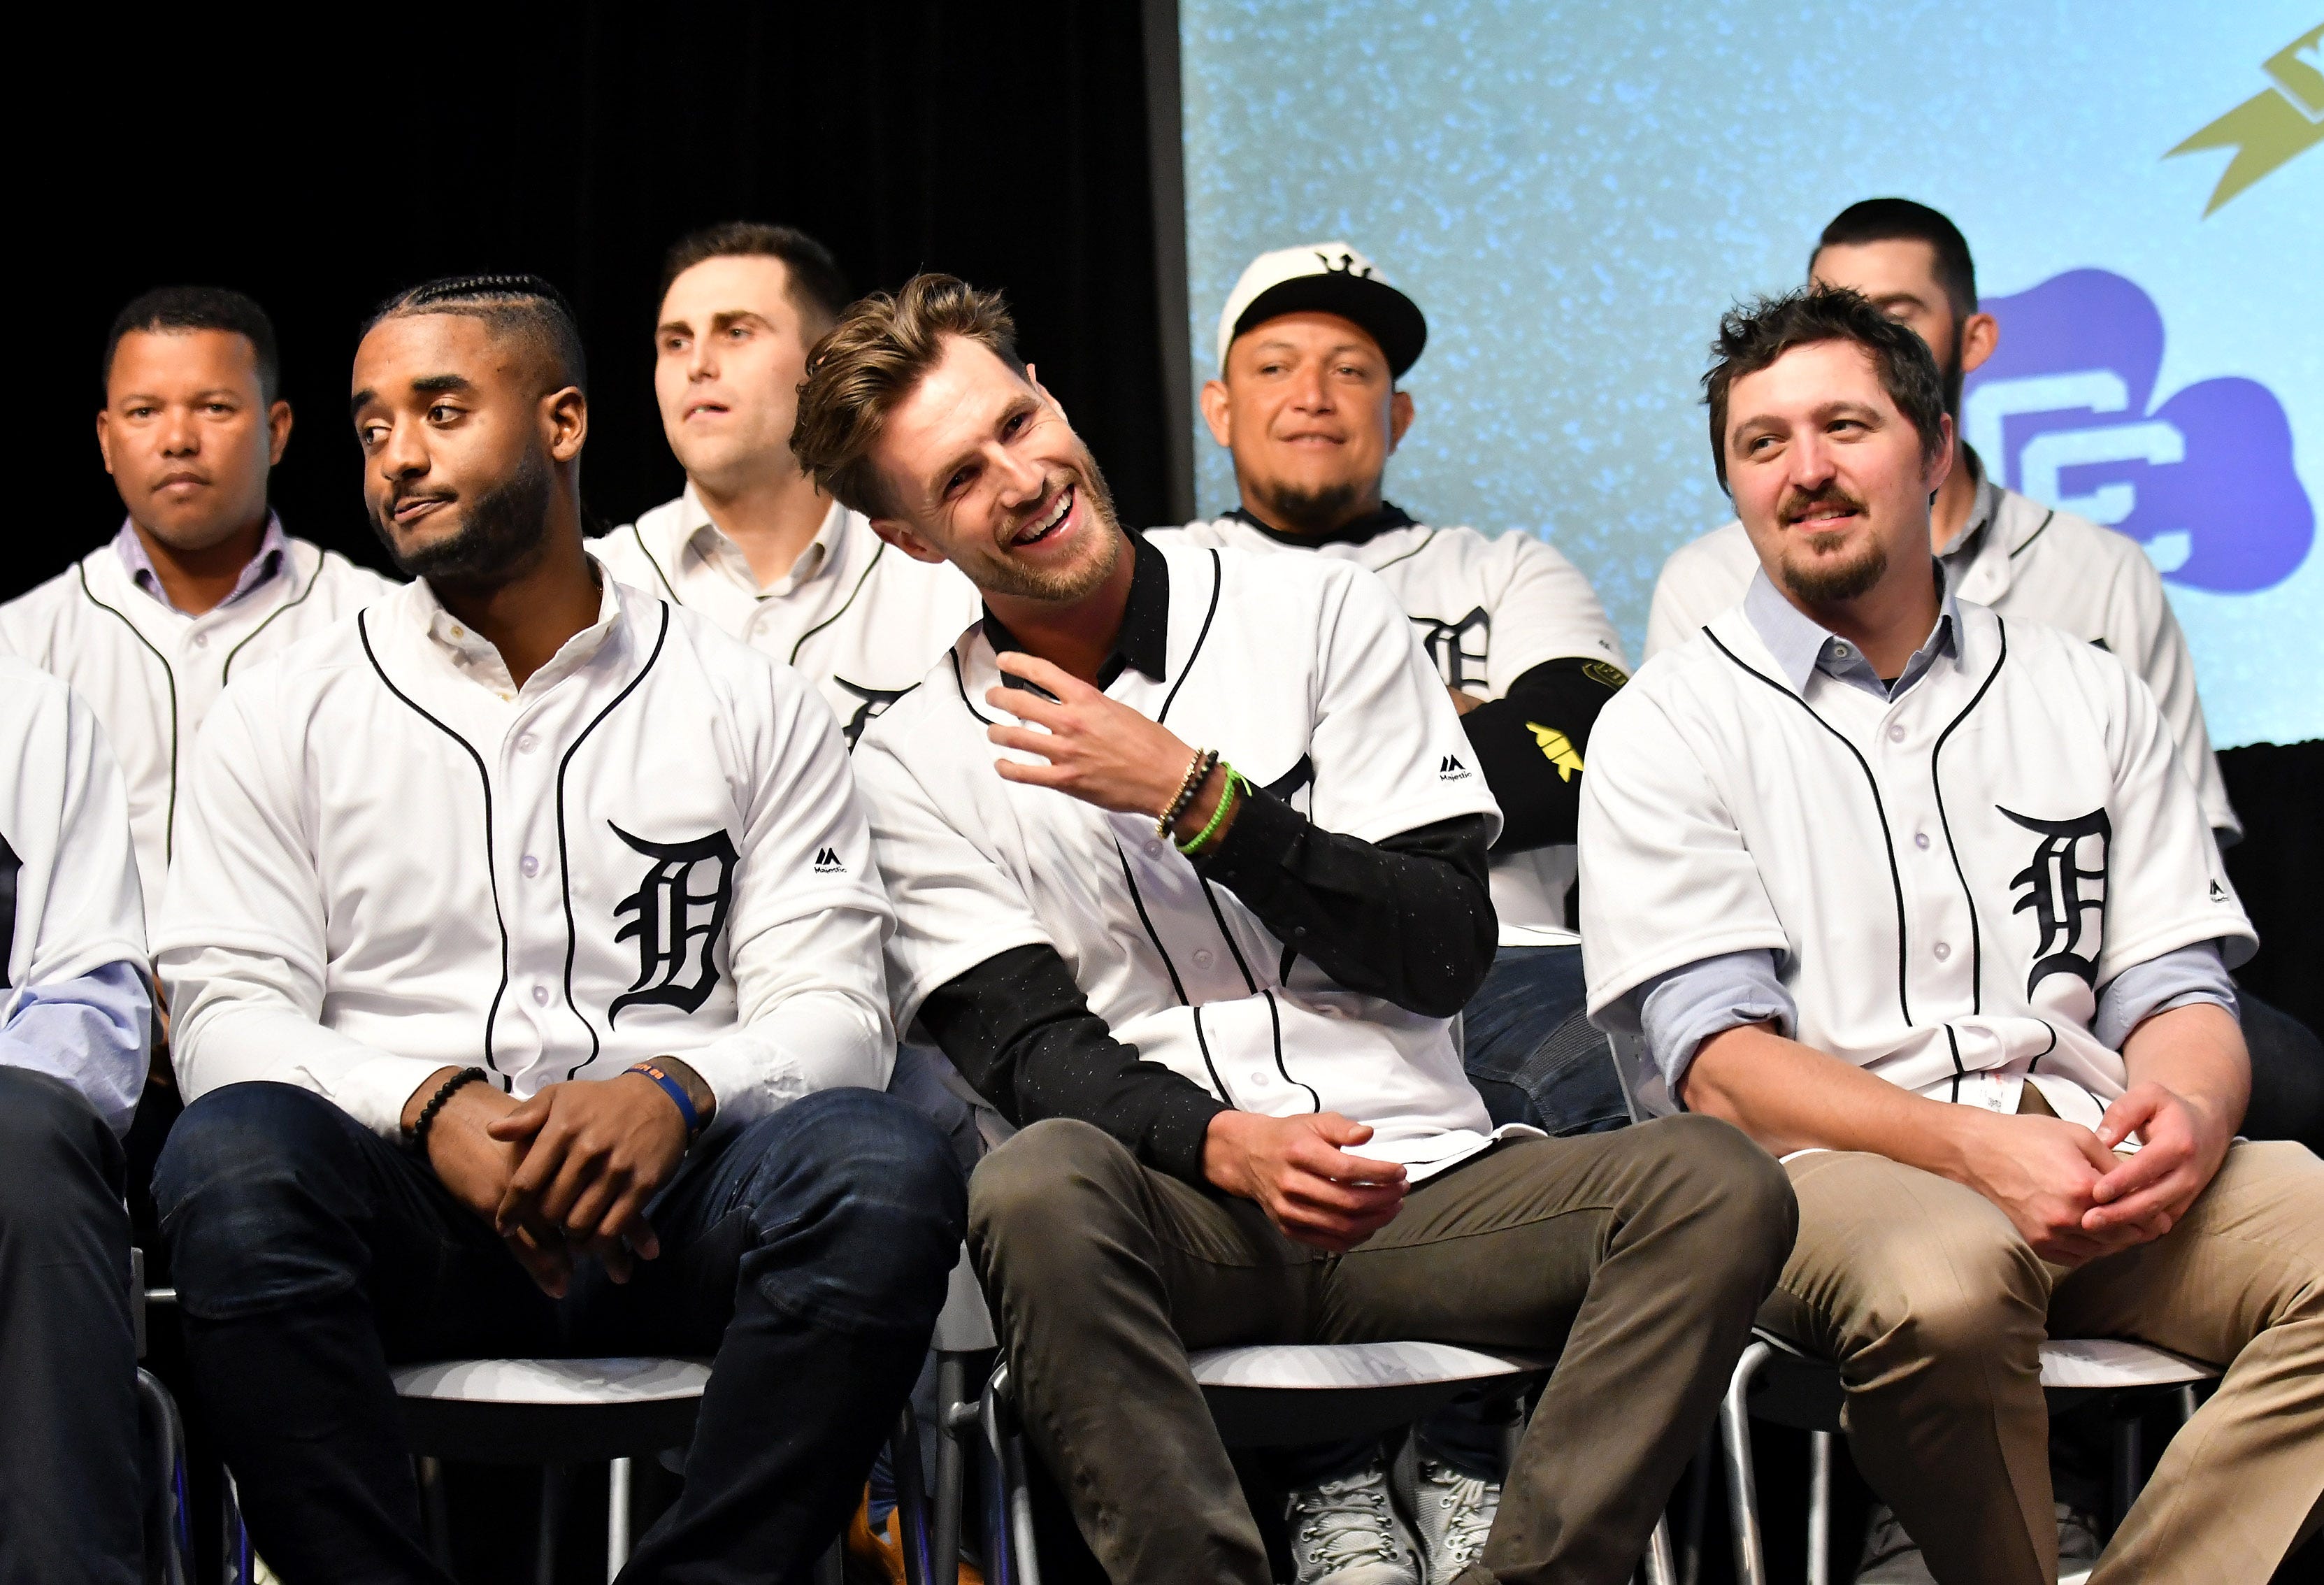 Tigers pitcher Shane Greene, center, laughs between his teammates, Niko Goodrum, left, and Blaine Hardy, right, at the Novi Civic Center.